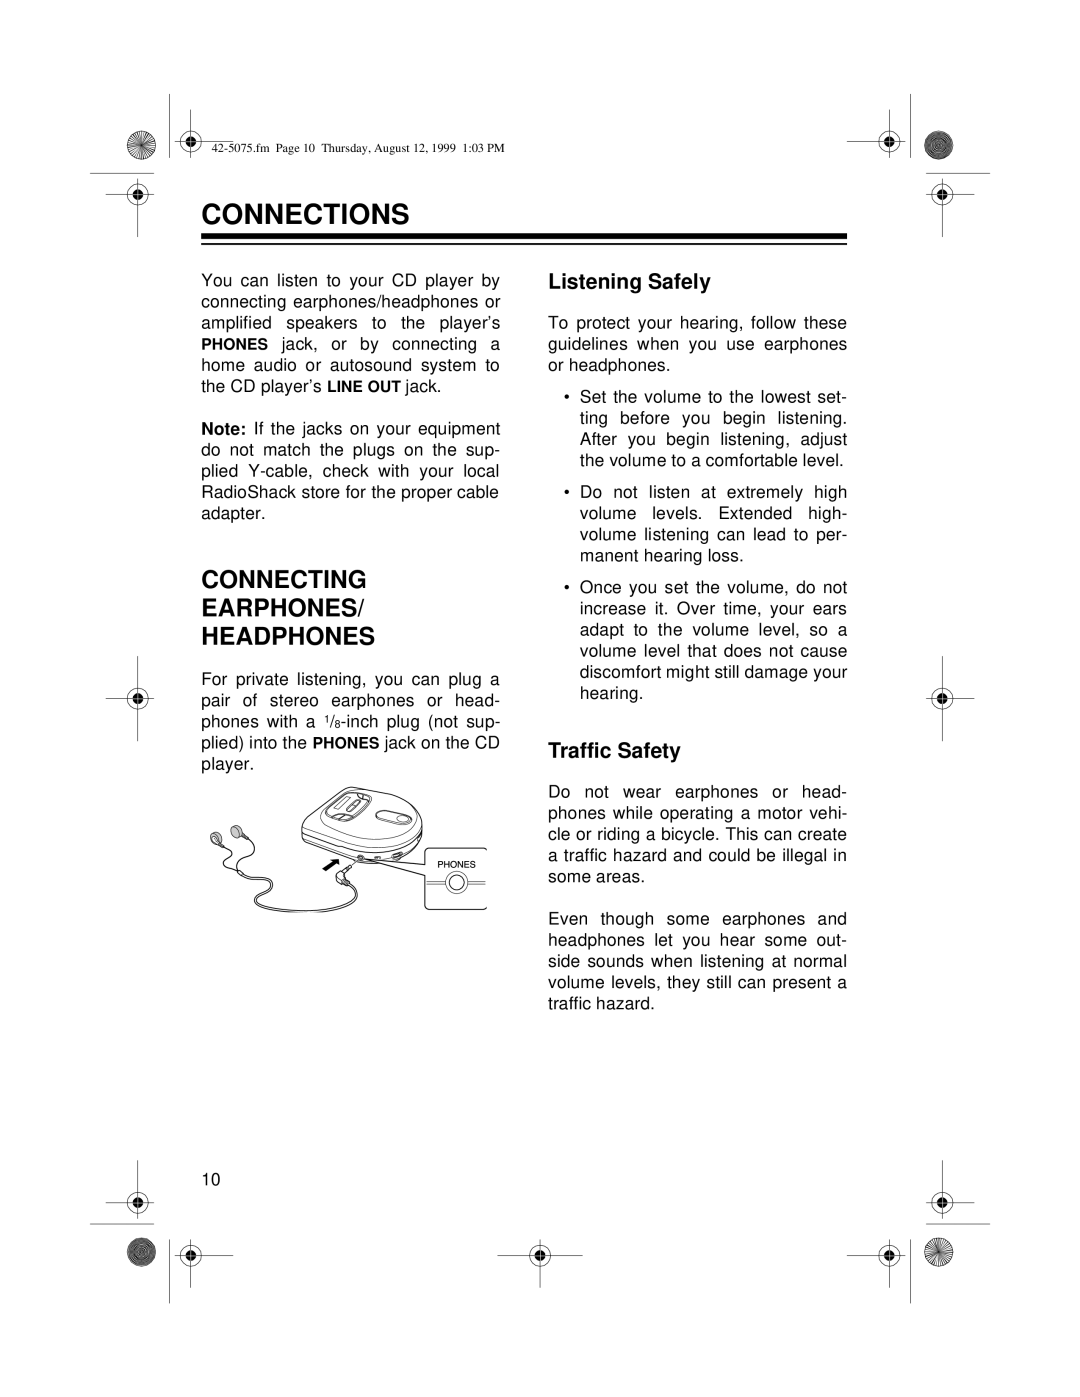 Optimus CD-3680 (42-5075) owner manual Connections, Connecting Earphones Headphones, Listening Safely, Traffic Safety 